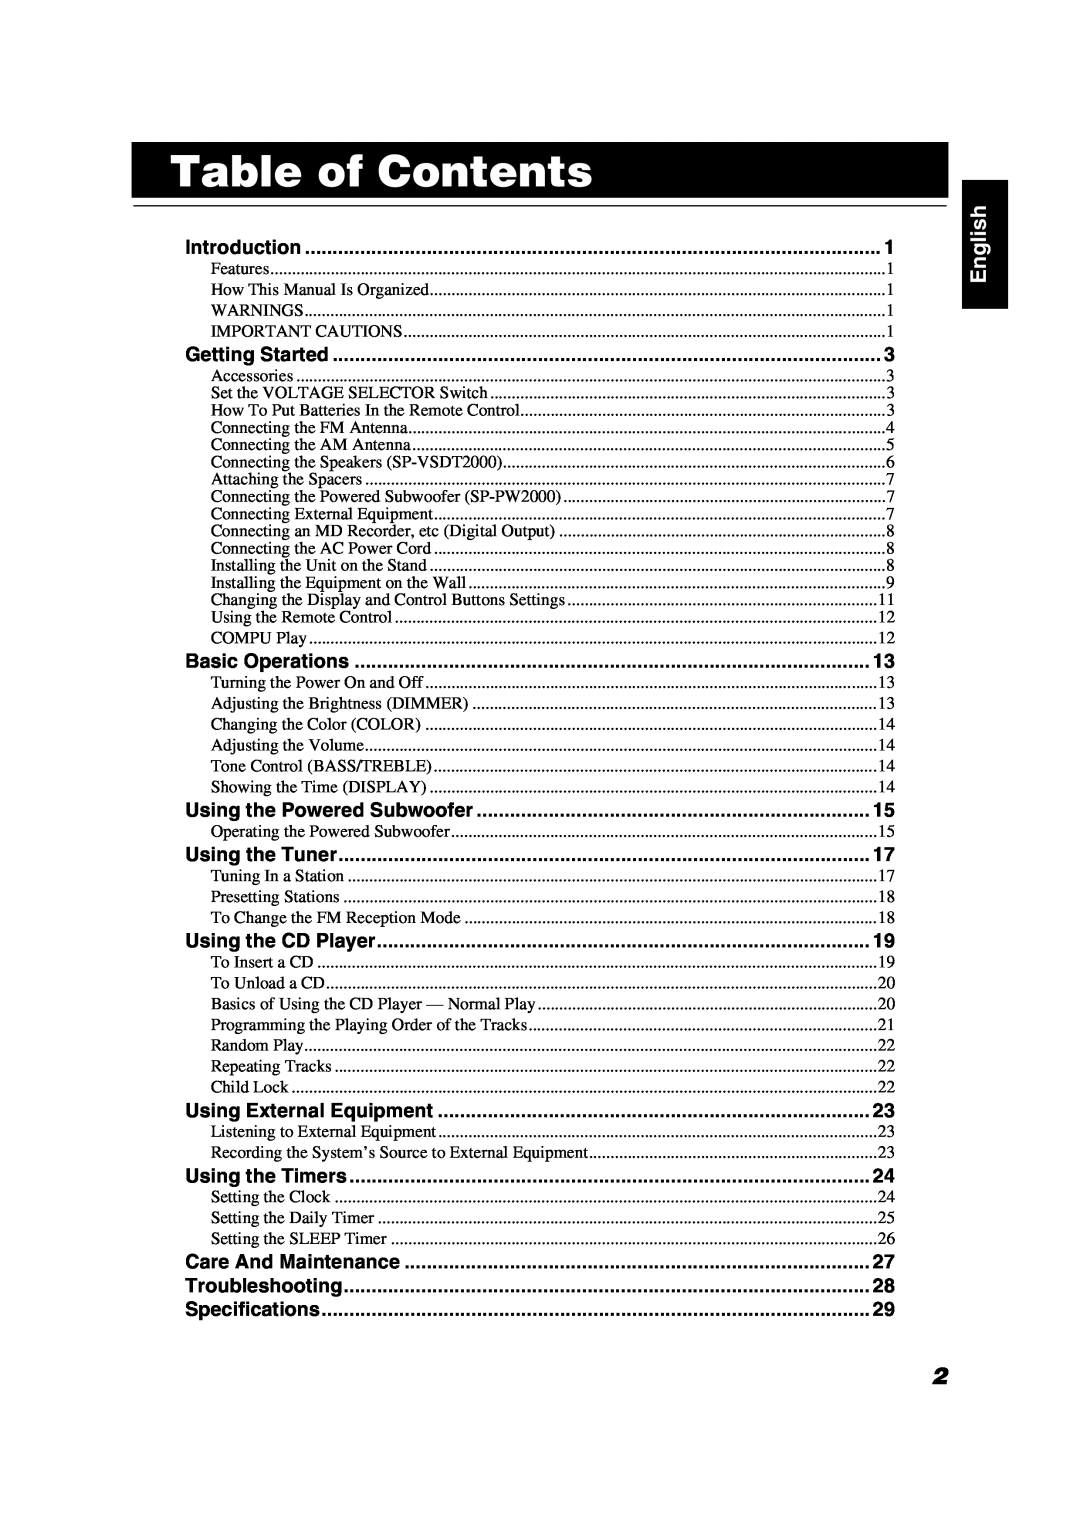 JVC VS-DT2000 manual Table of Contents, English 